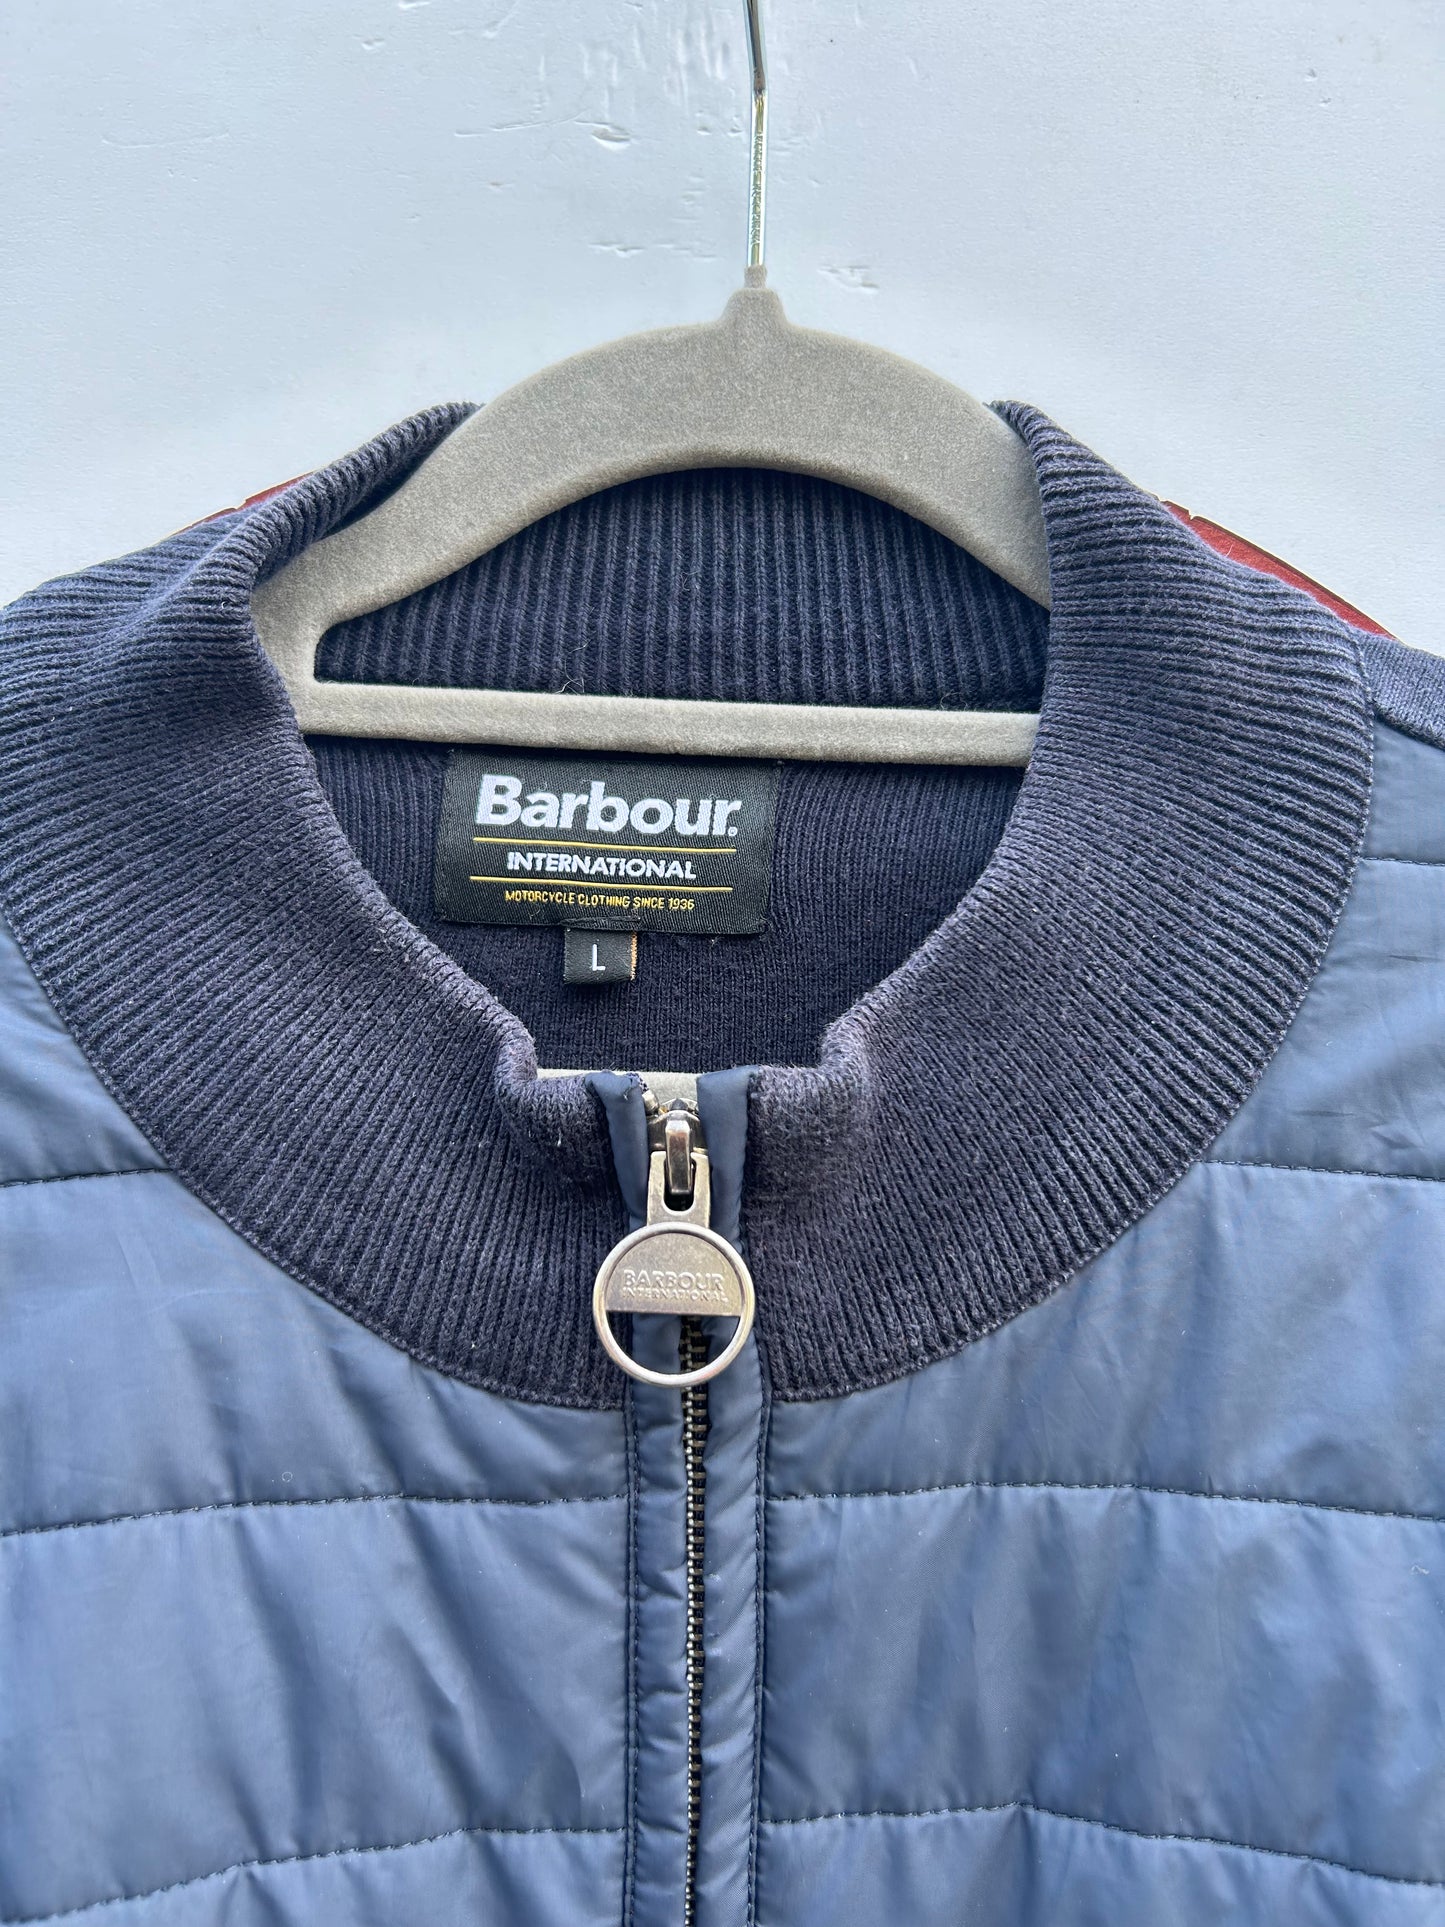 Barbour Maglia giacca Uomo blu Large Man navy Quilt Jacket Size L